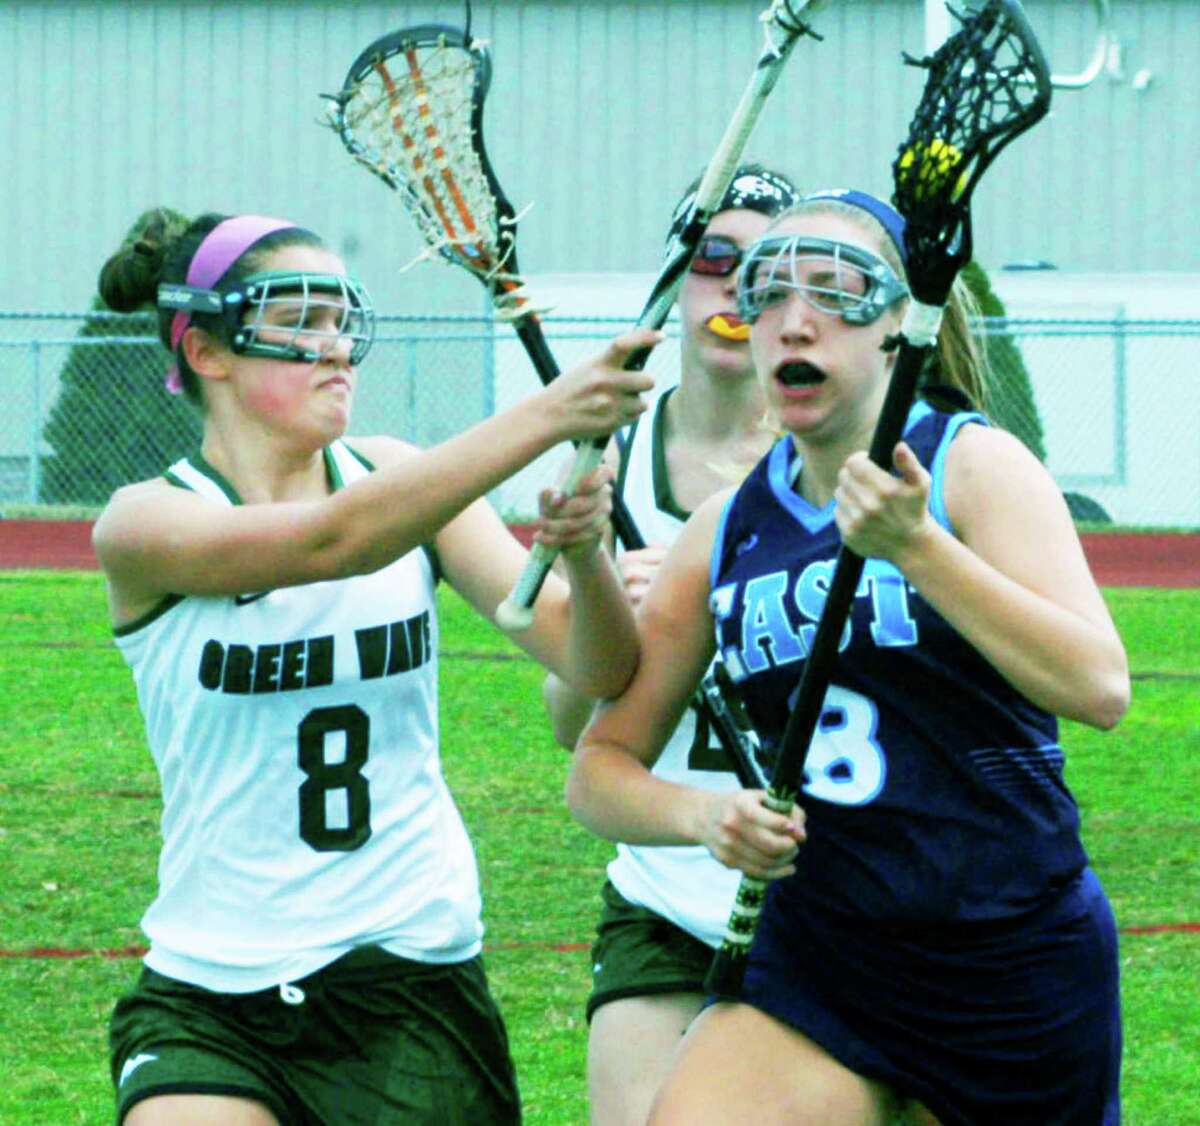 The Green Wave's Autumn Faitak (8) and Natalie Capriglione challenge a rival player for possession during New Milford High School girls' lacrosse's victory over East Catholic, April 18, 2015 at NMHS.